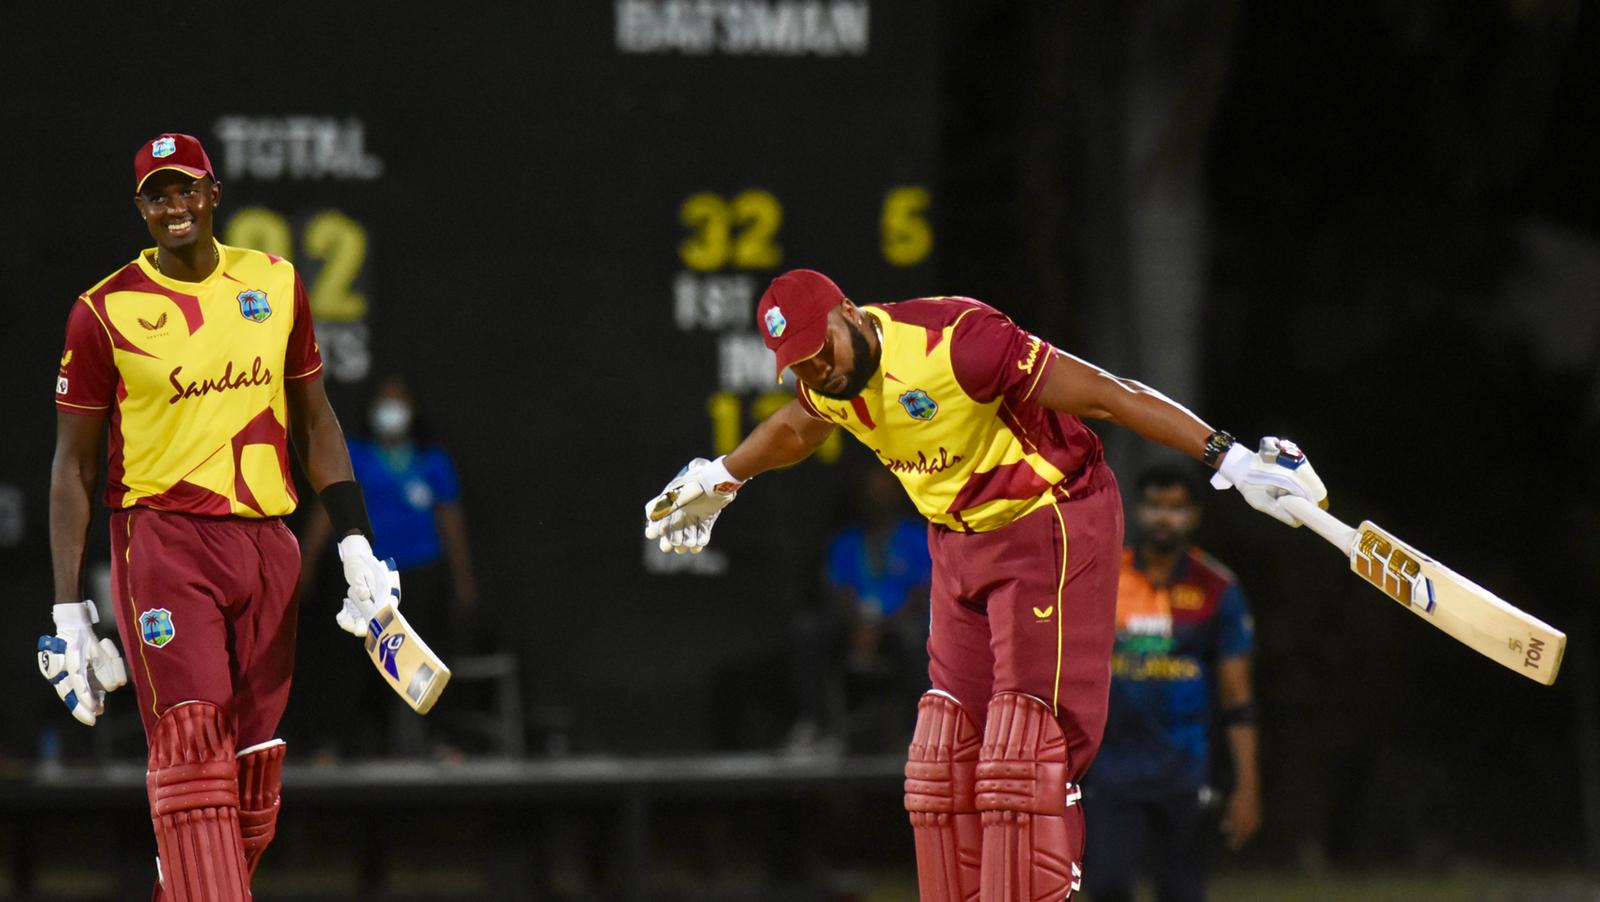 Pollard smashed 6 sixes in an over | West Indies Cricket/Twitter